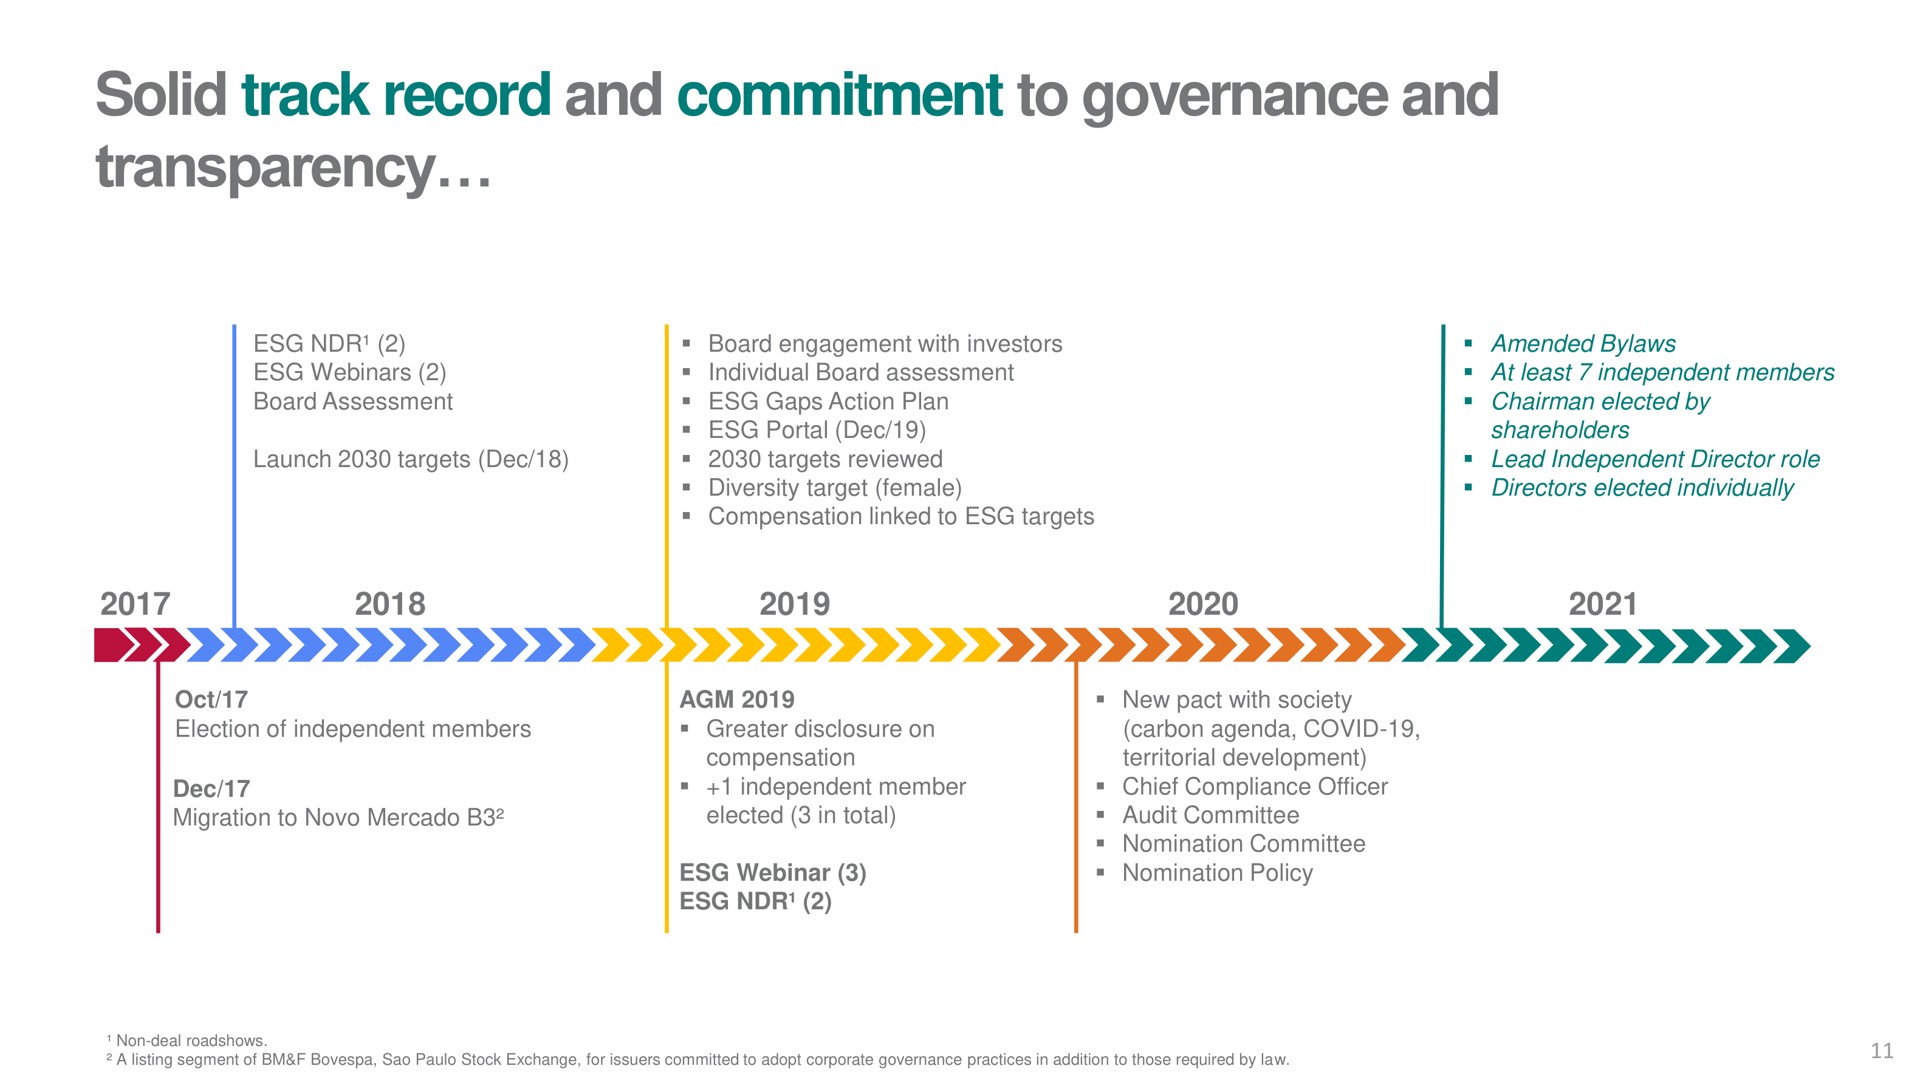 solid track record and commitment to governance and transparency | Vale